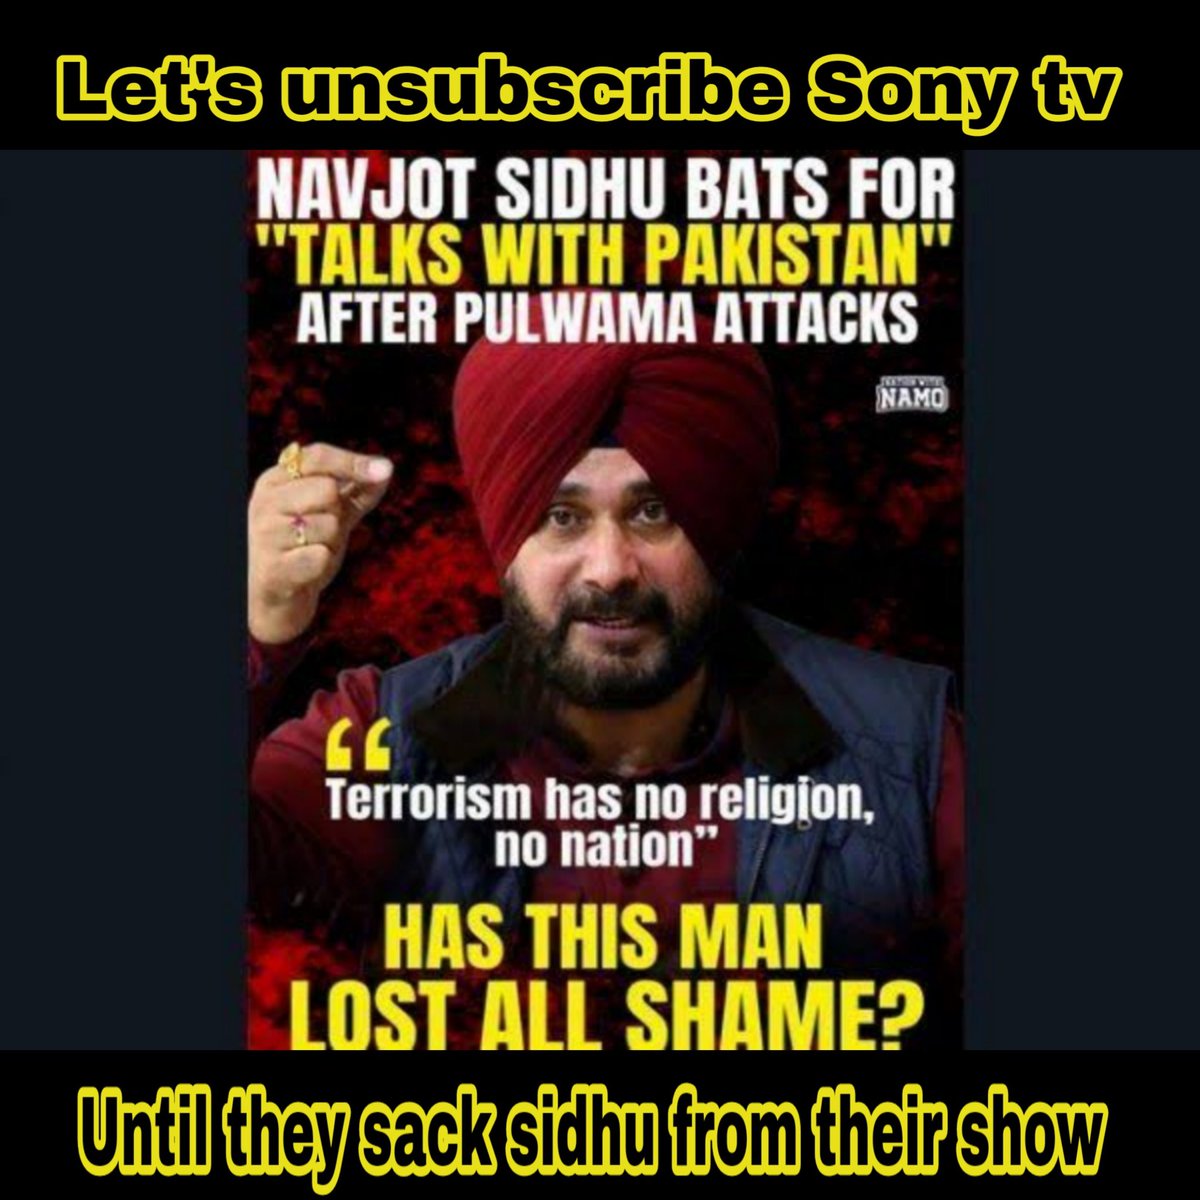 RT if you unsubscribed @SonyTV or Going to Unsubscribe #BoycottKapilSharma